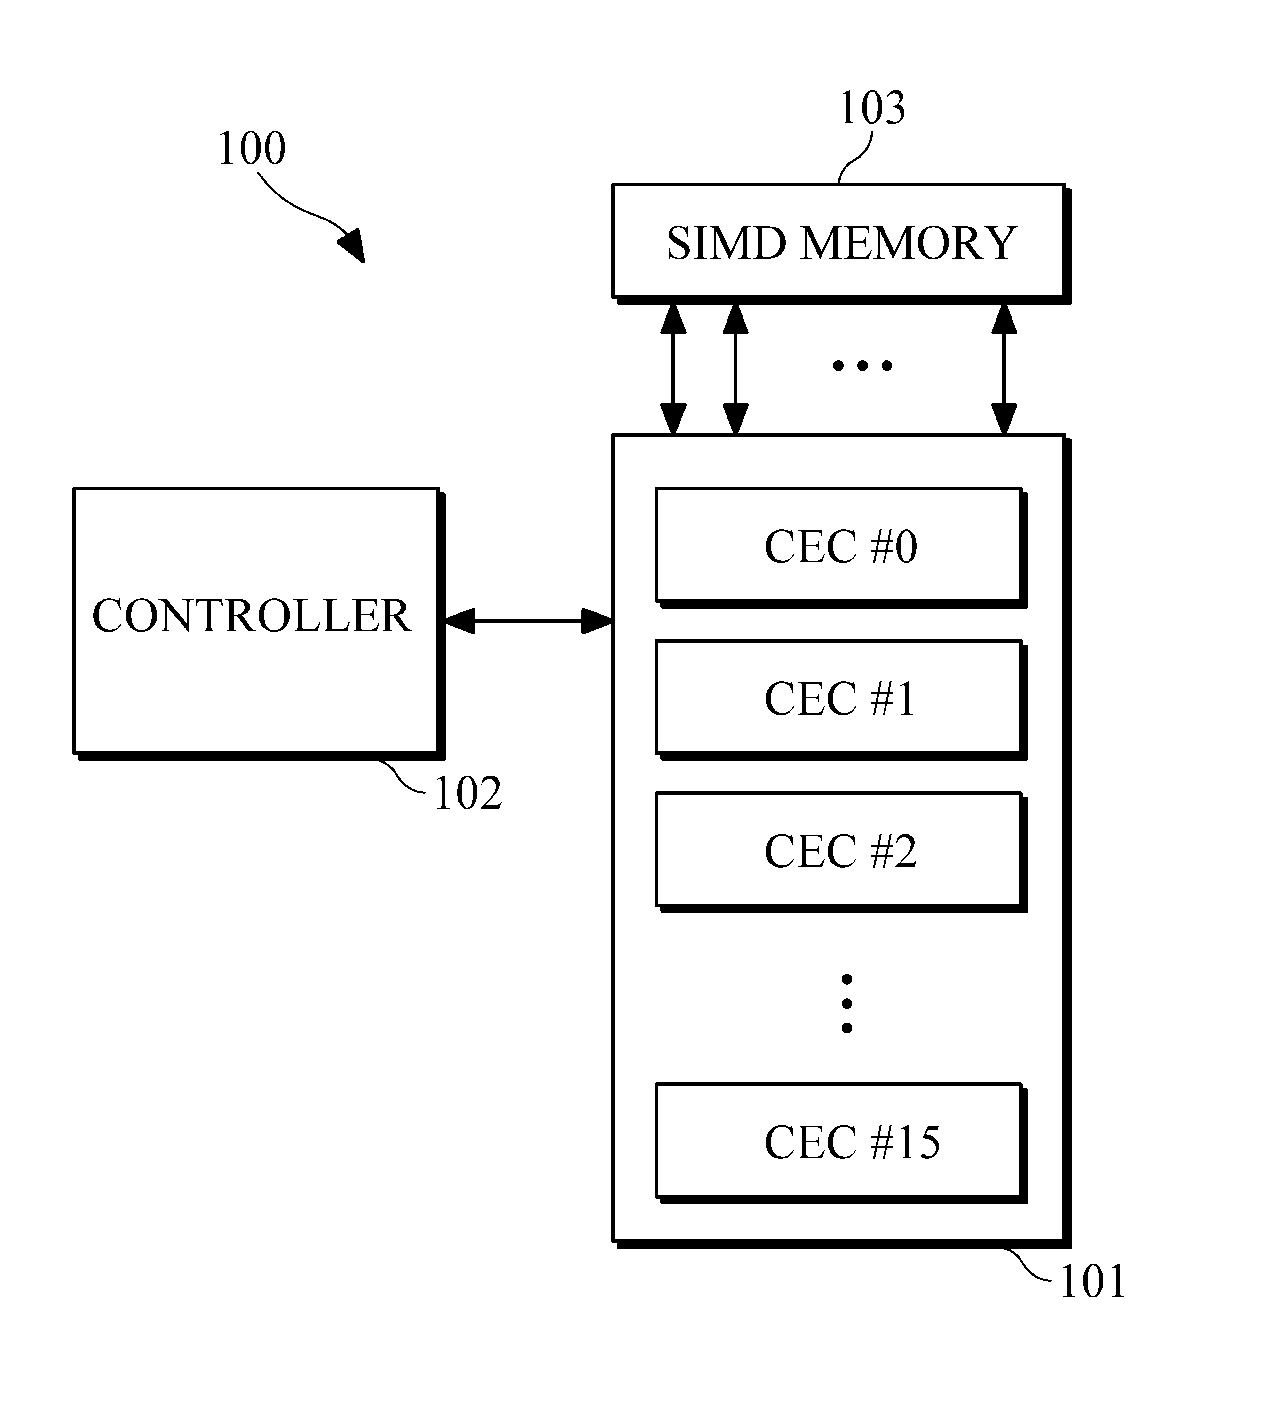 Computing apparatus and method based on a reconfigurable single instruction multiple data (SIMD) architecture